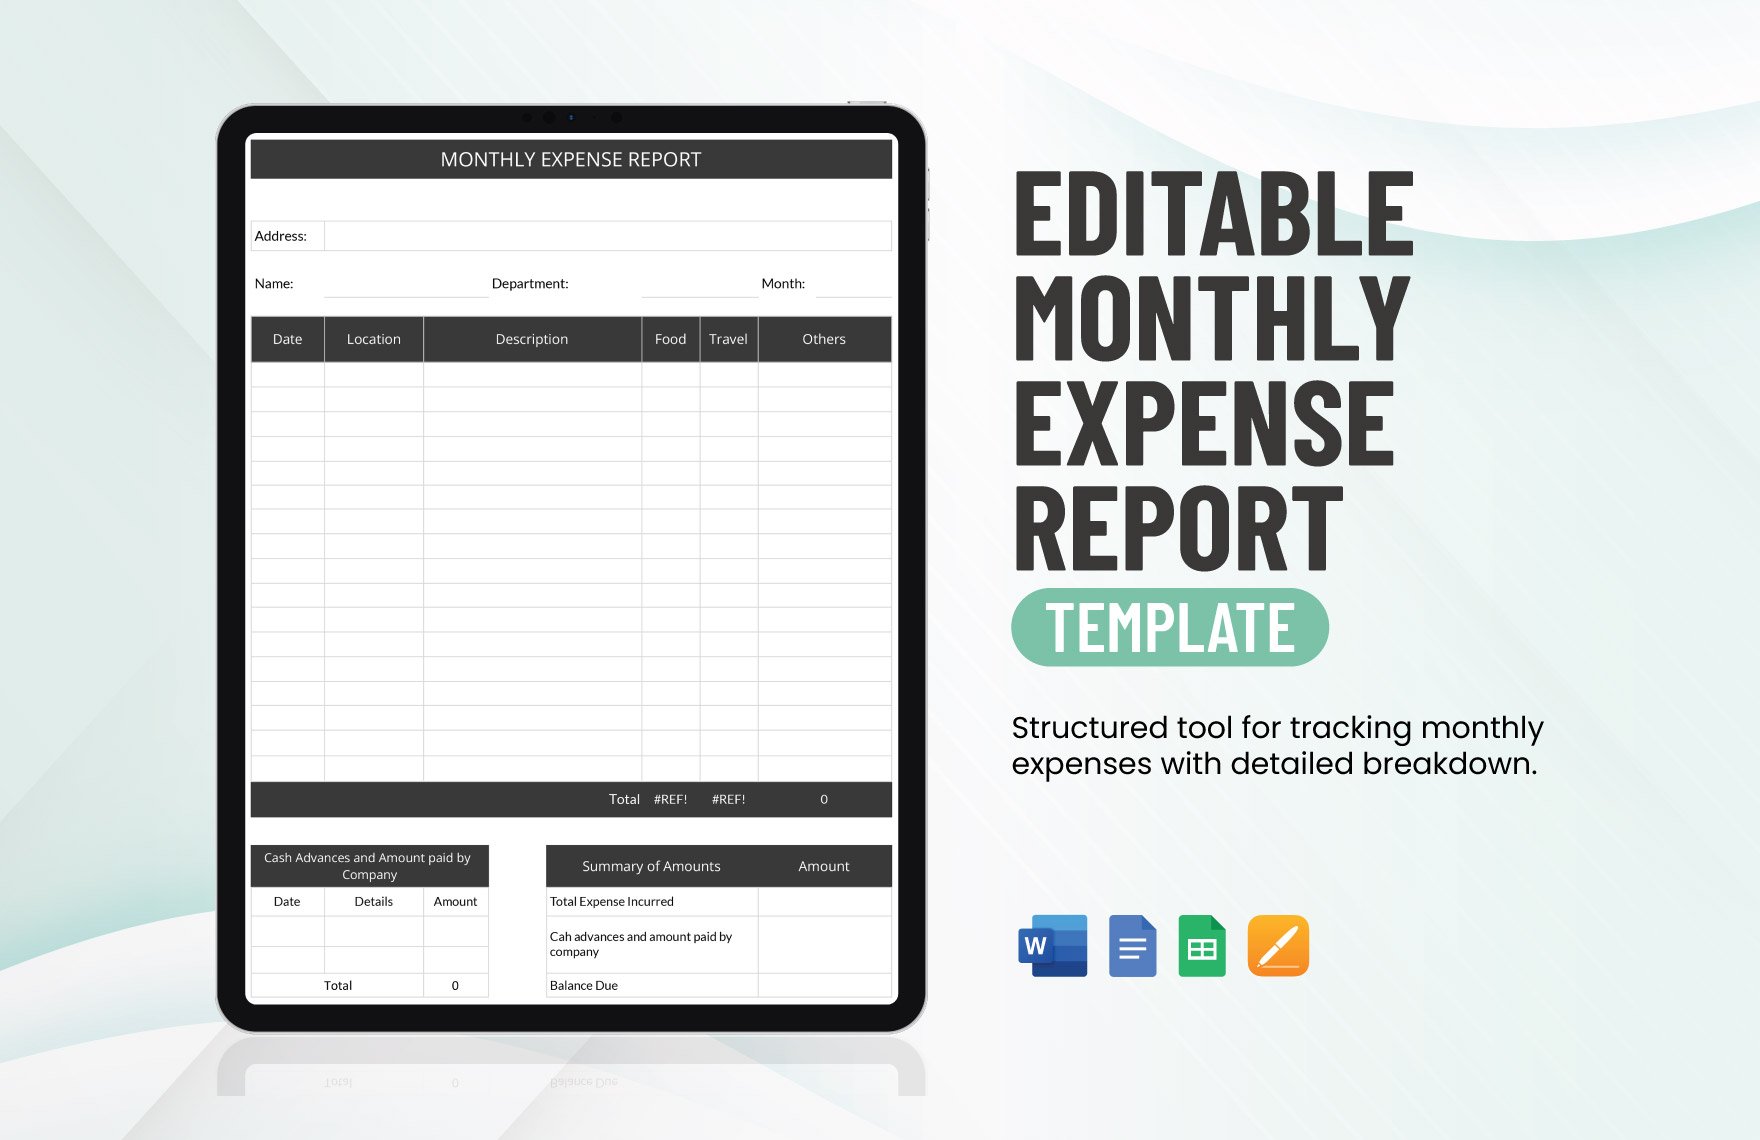 Editable Monthly Expense Report Template in Word, Google Docs, Google Sheets, Apple Pages